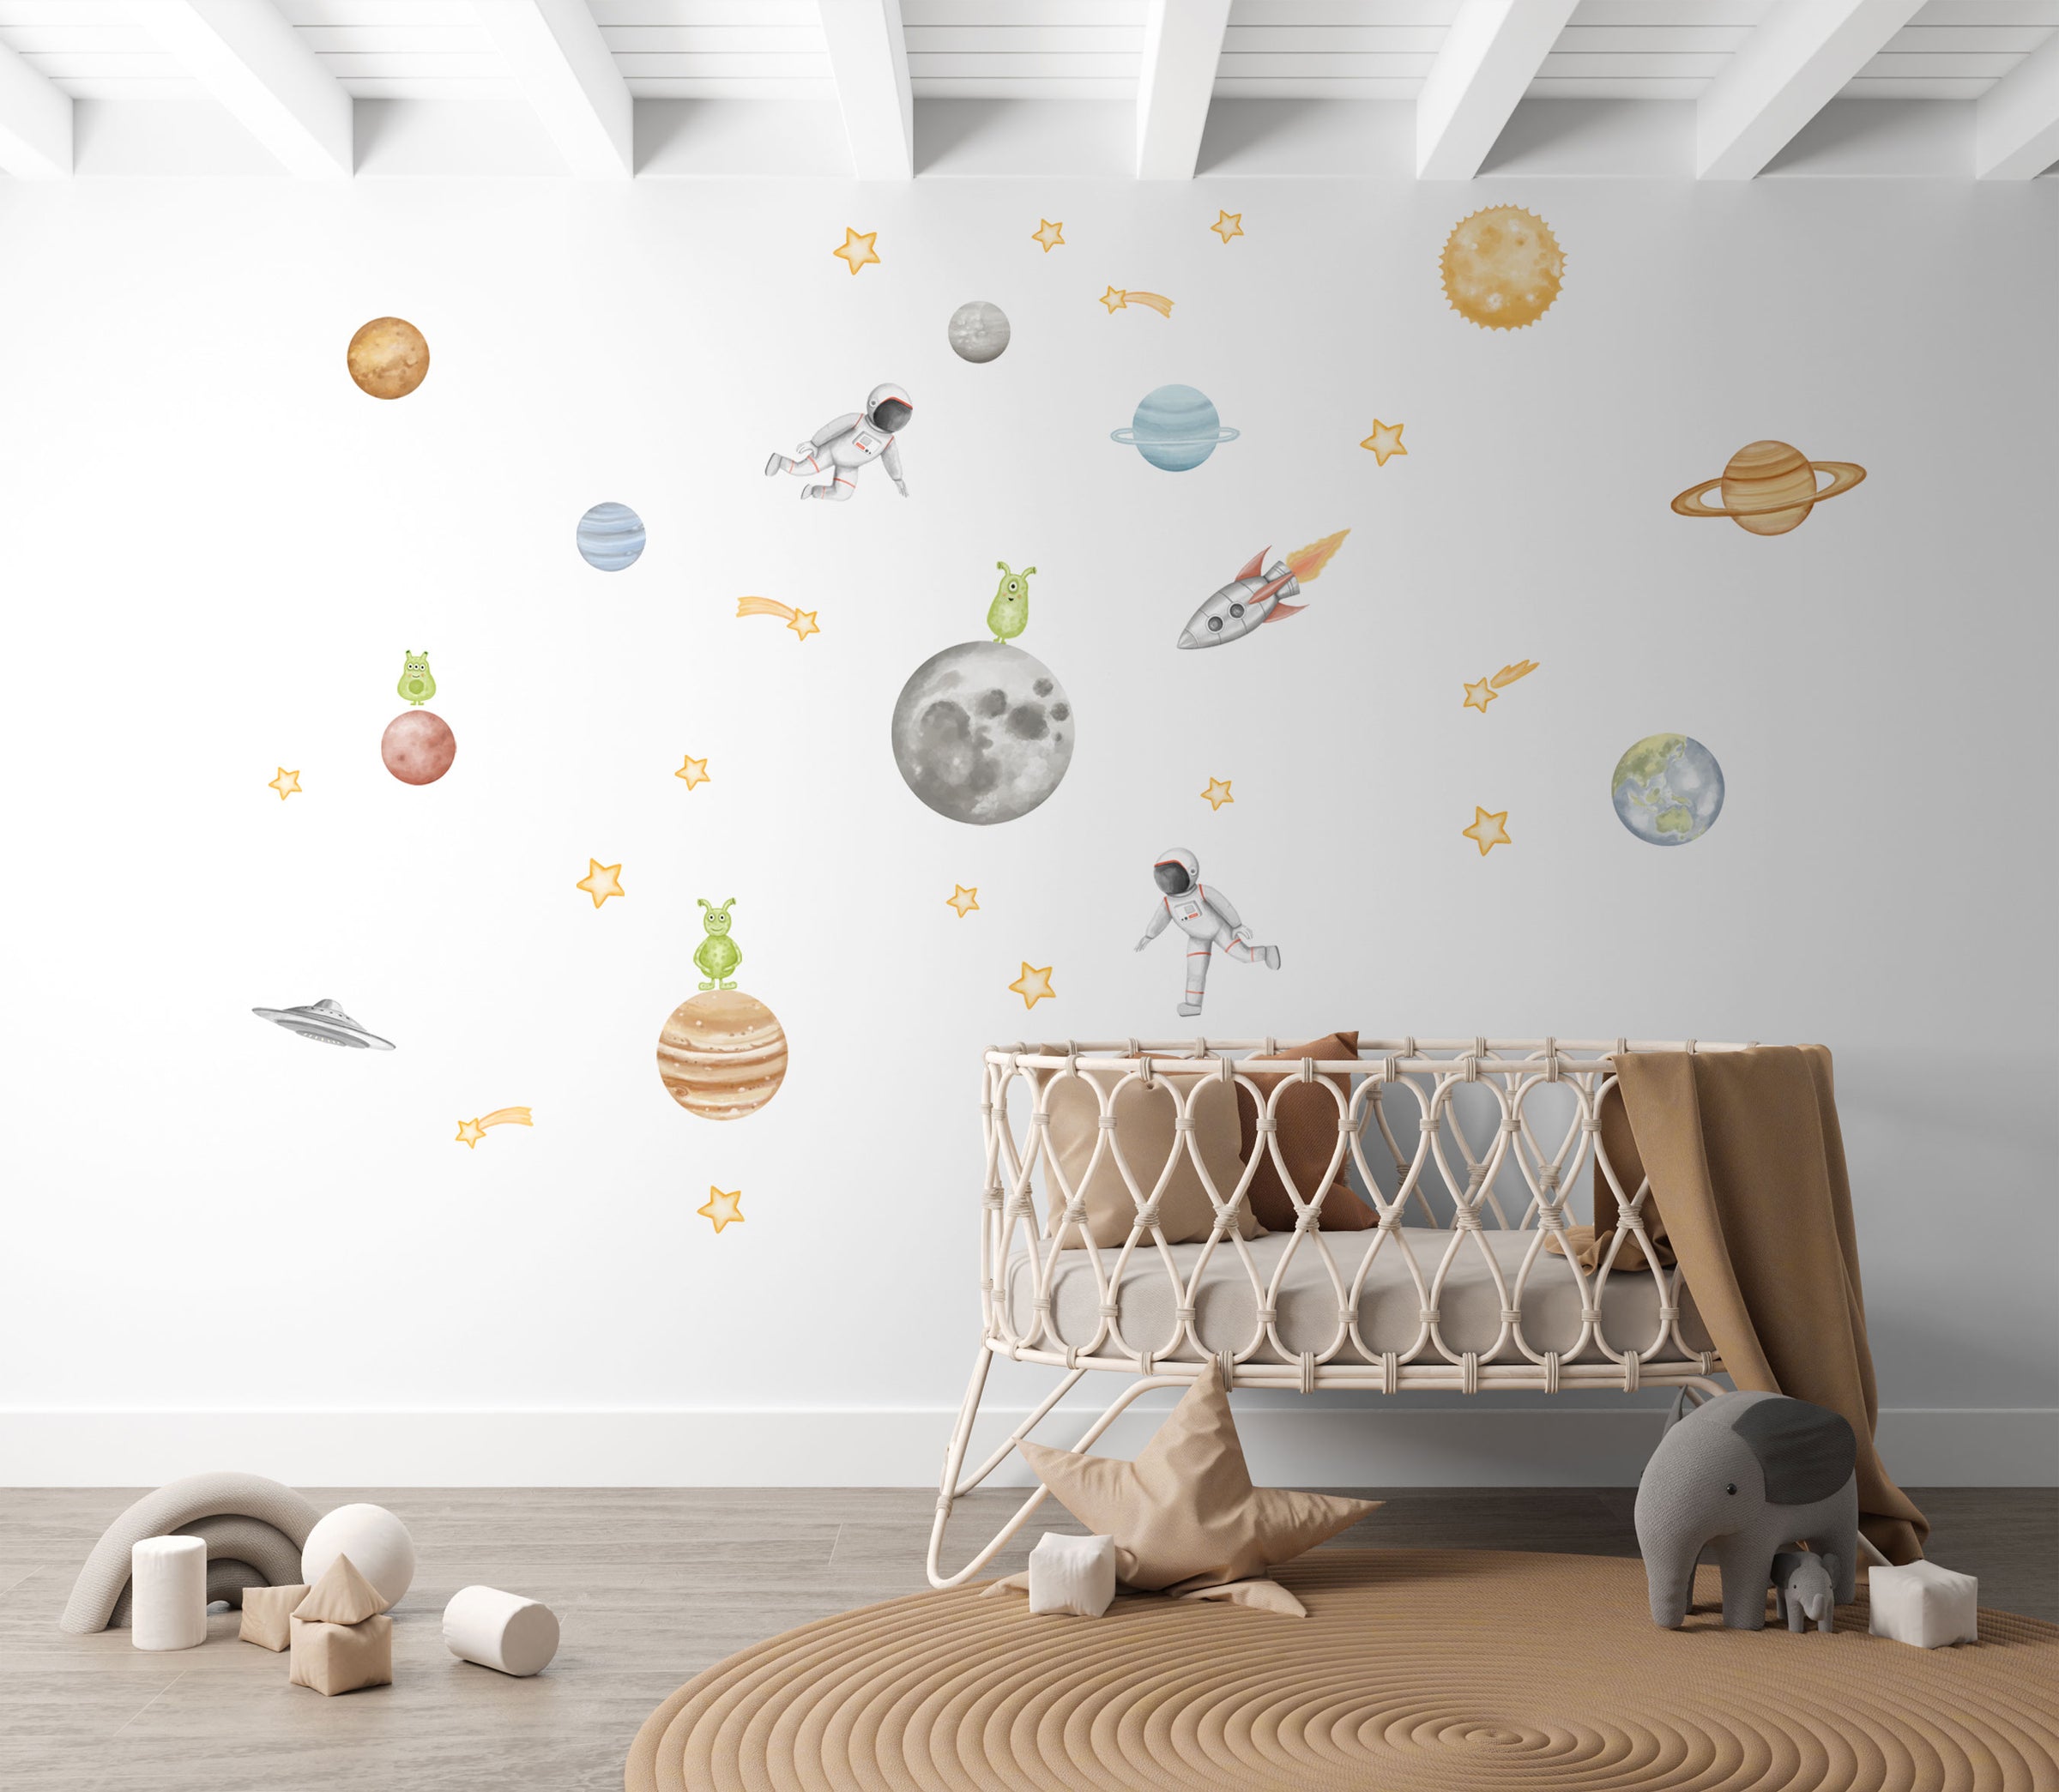 Space Wall Stickers